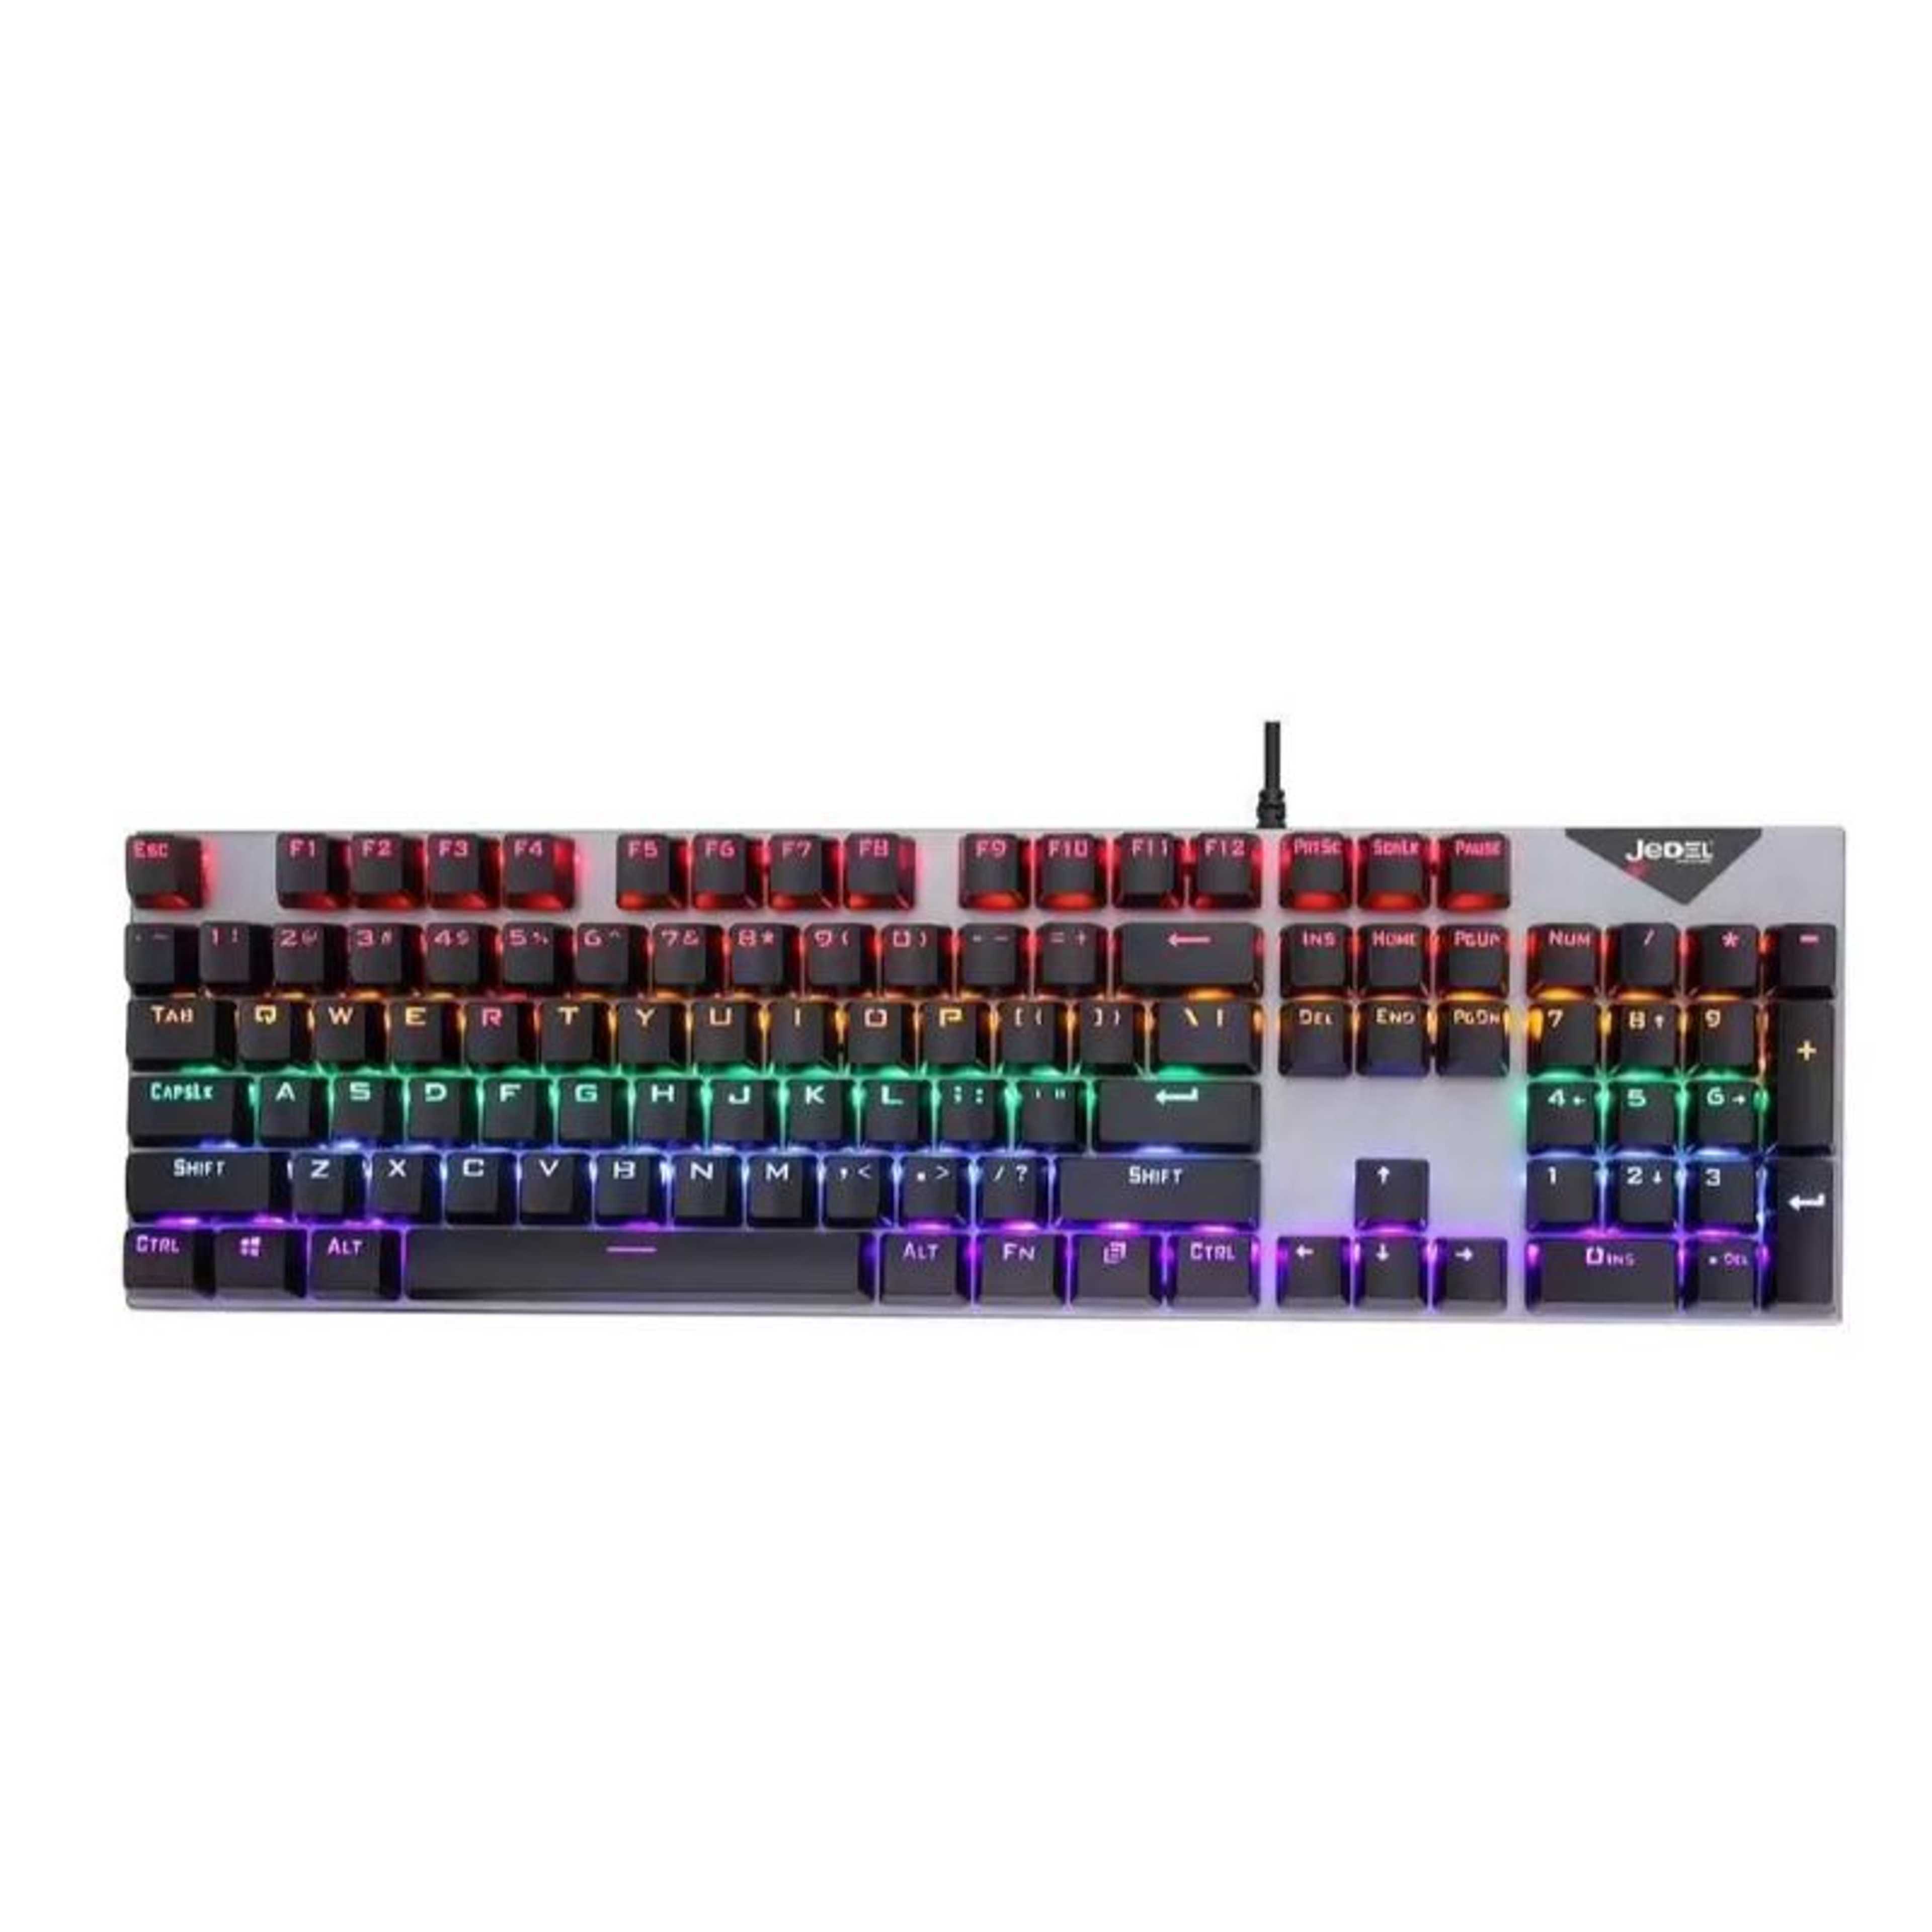 JEDEL KL95 Gaming Mechanical RGB Backlit Wired Keyboard